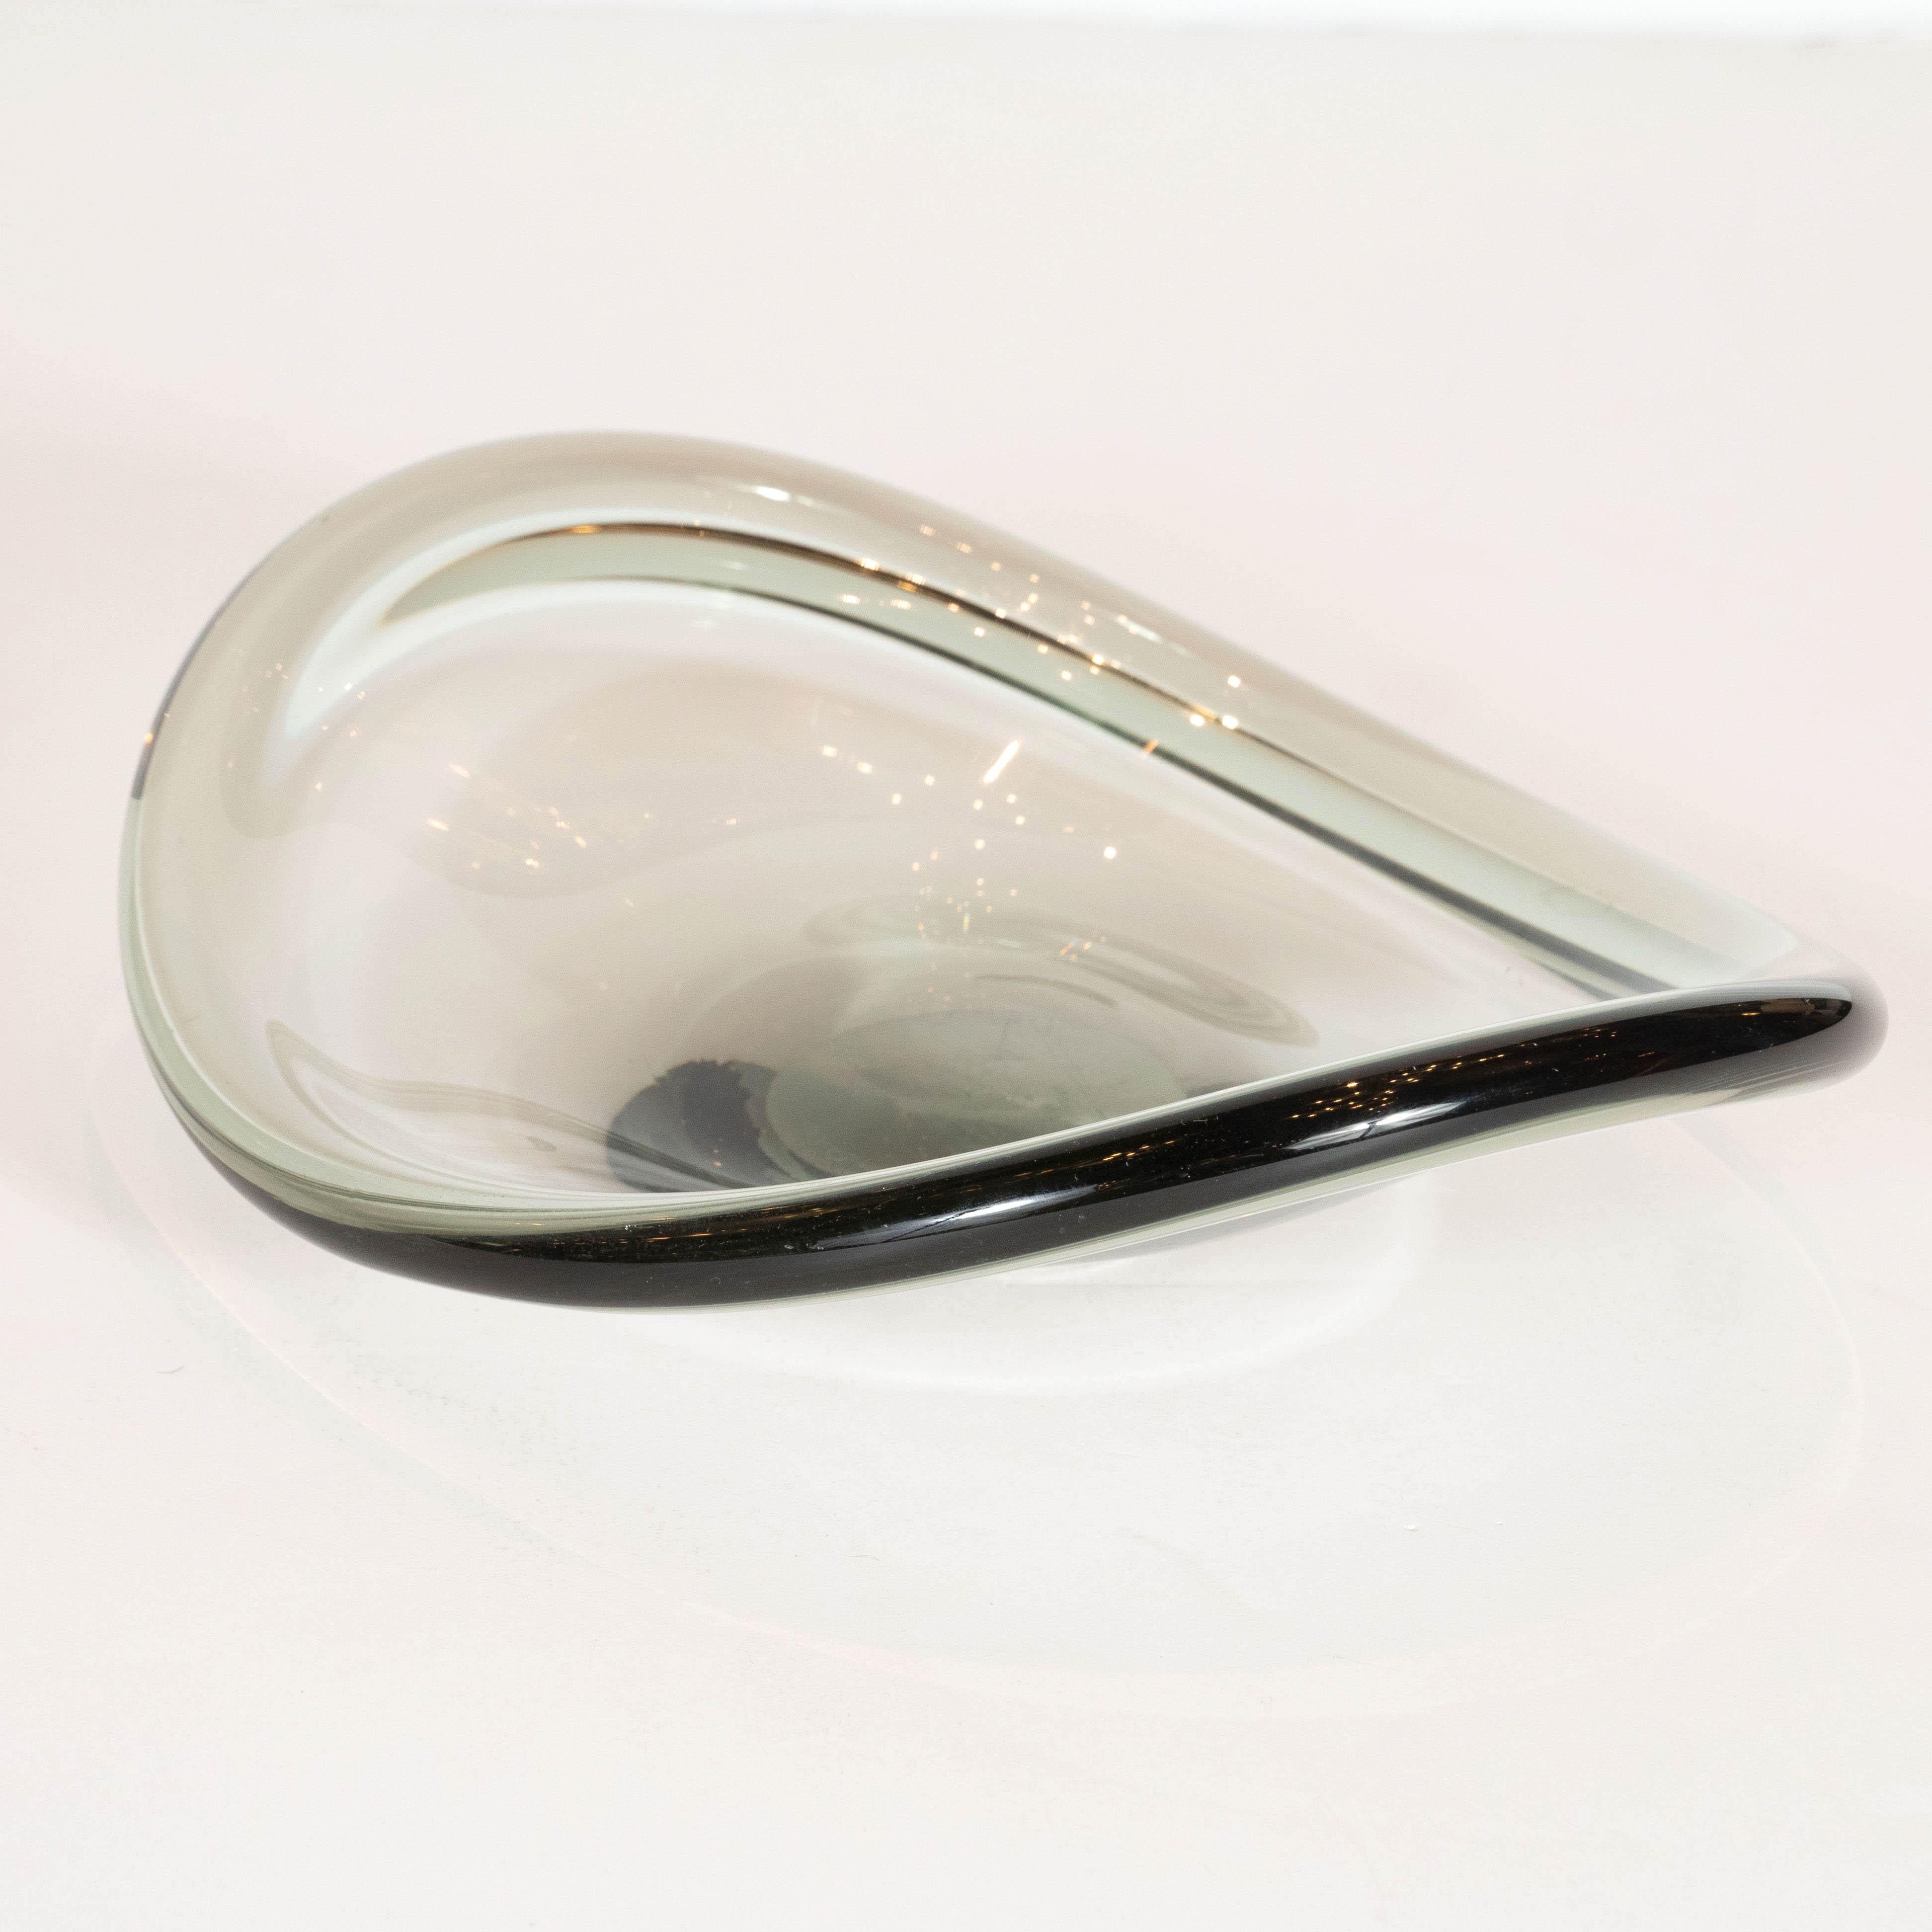 Blown Glass Scandinavian Mid-Century Modern Smoked Elliptical Bowl Signed by Holmgaard